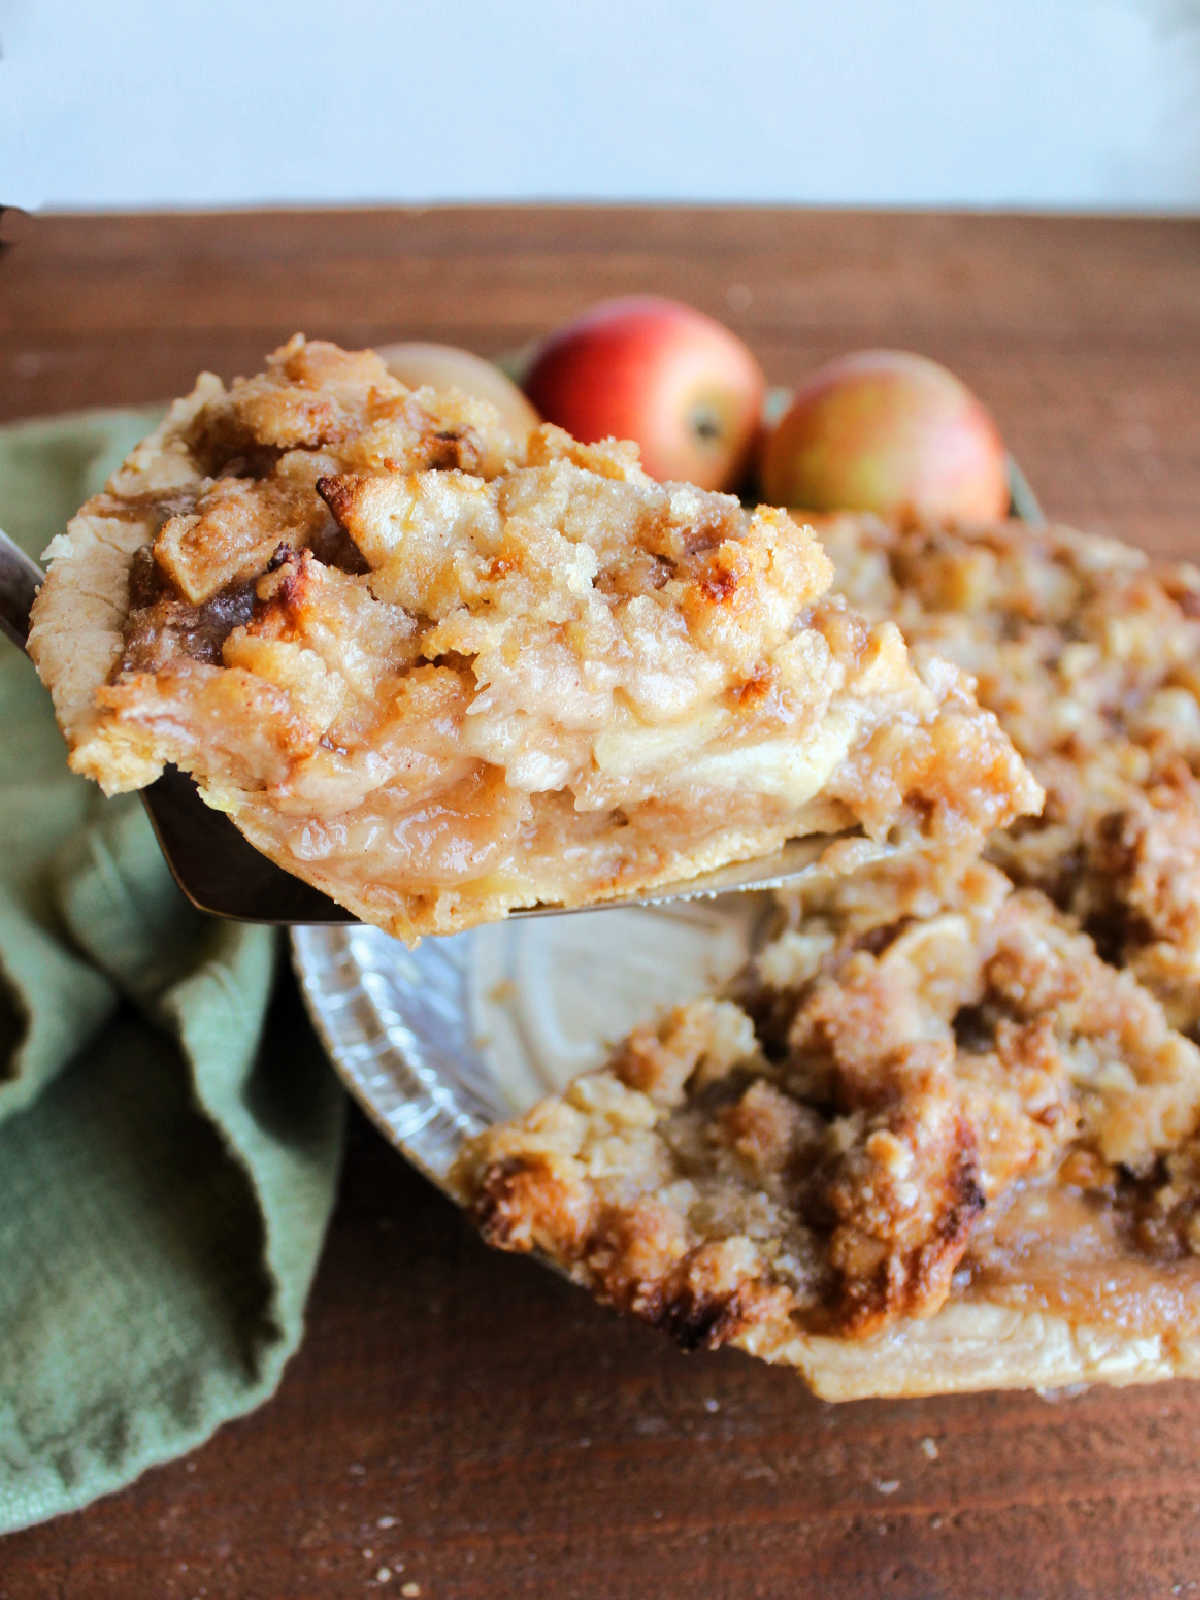 Pie server lifting out a slice of apple crumb pie with soft apple slices in the middle and buttery crumbs on top. 